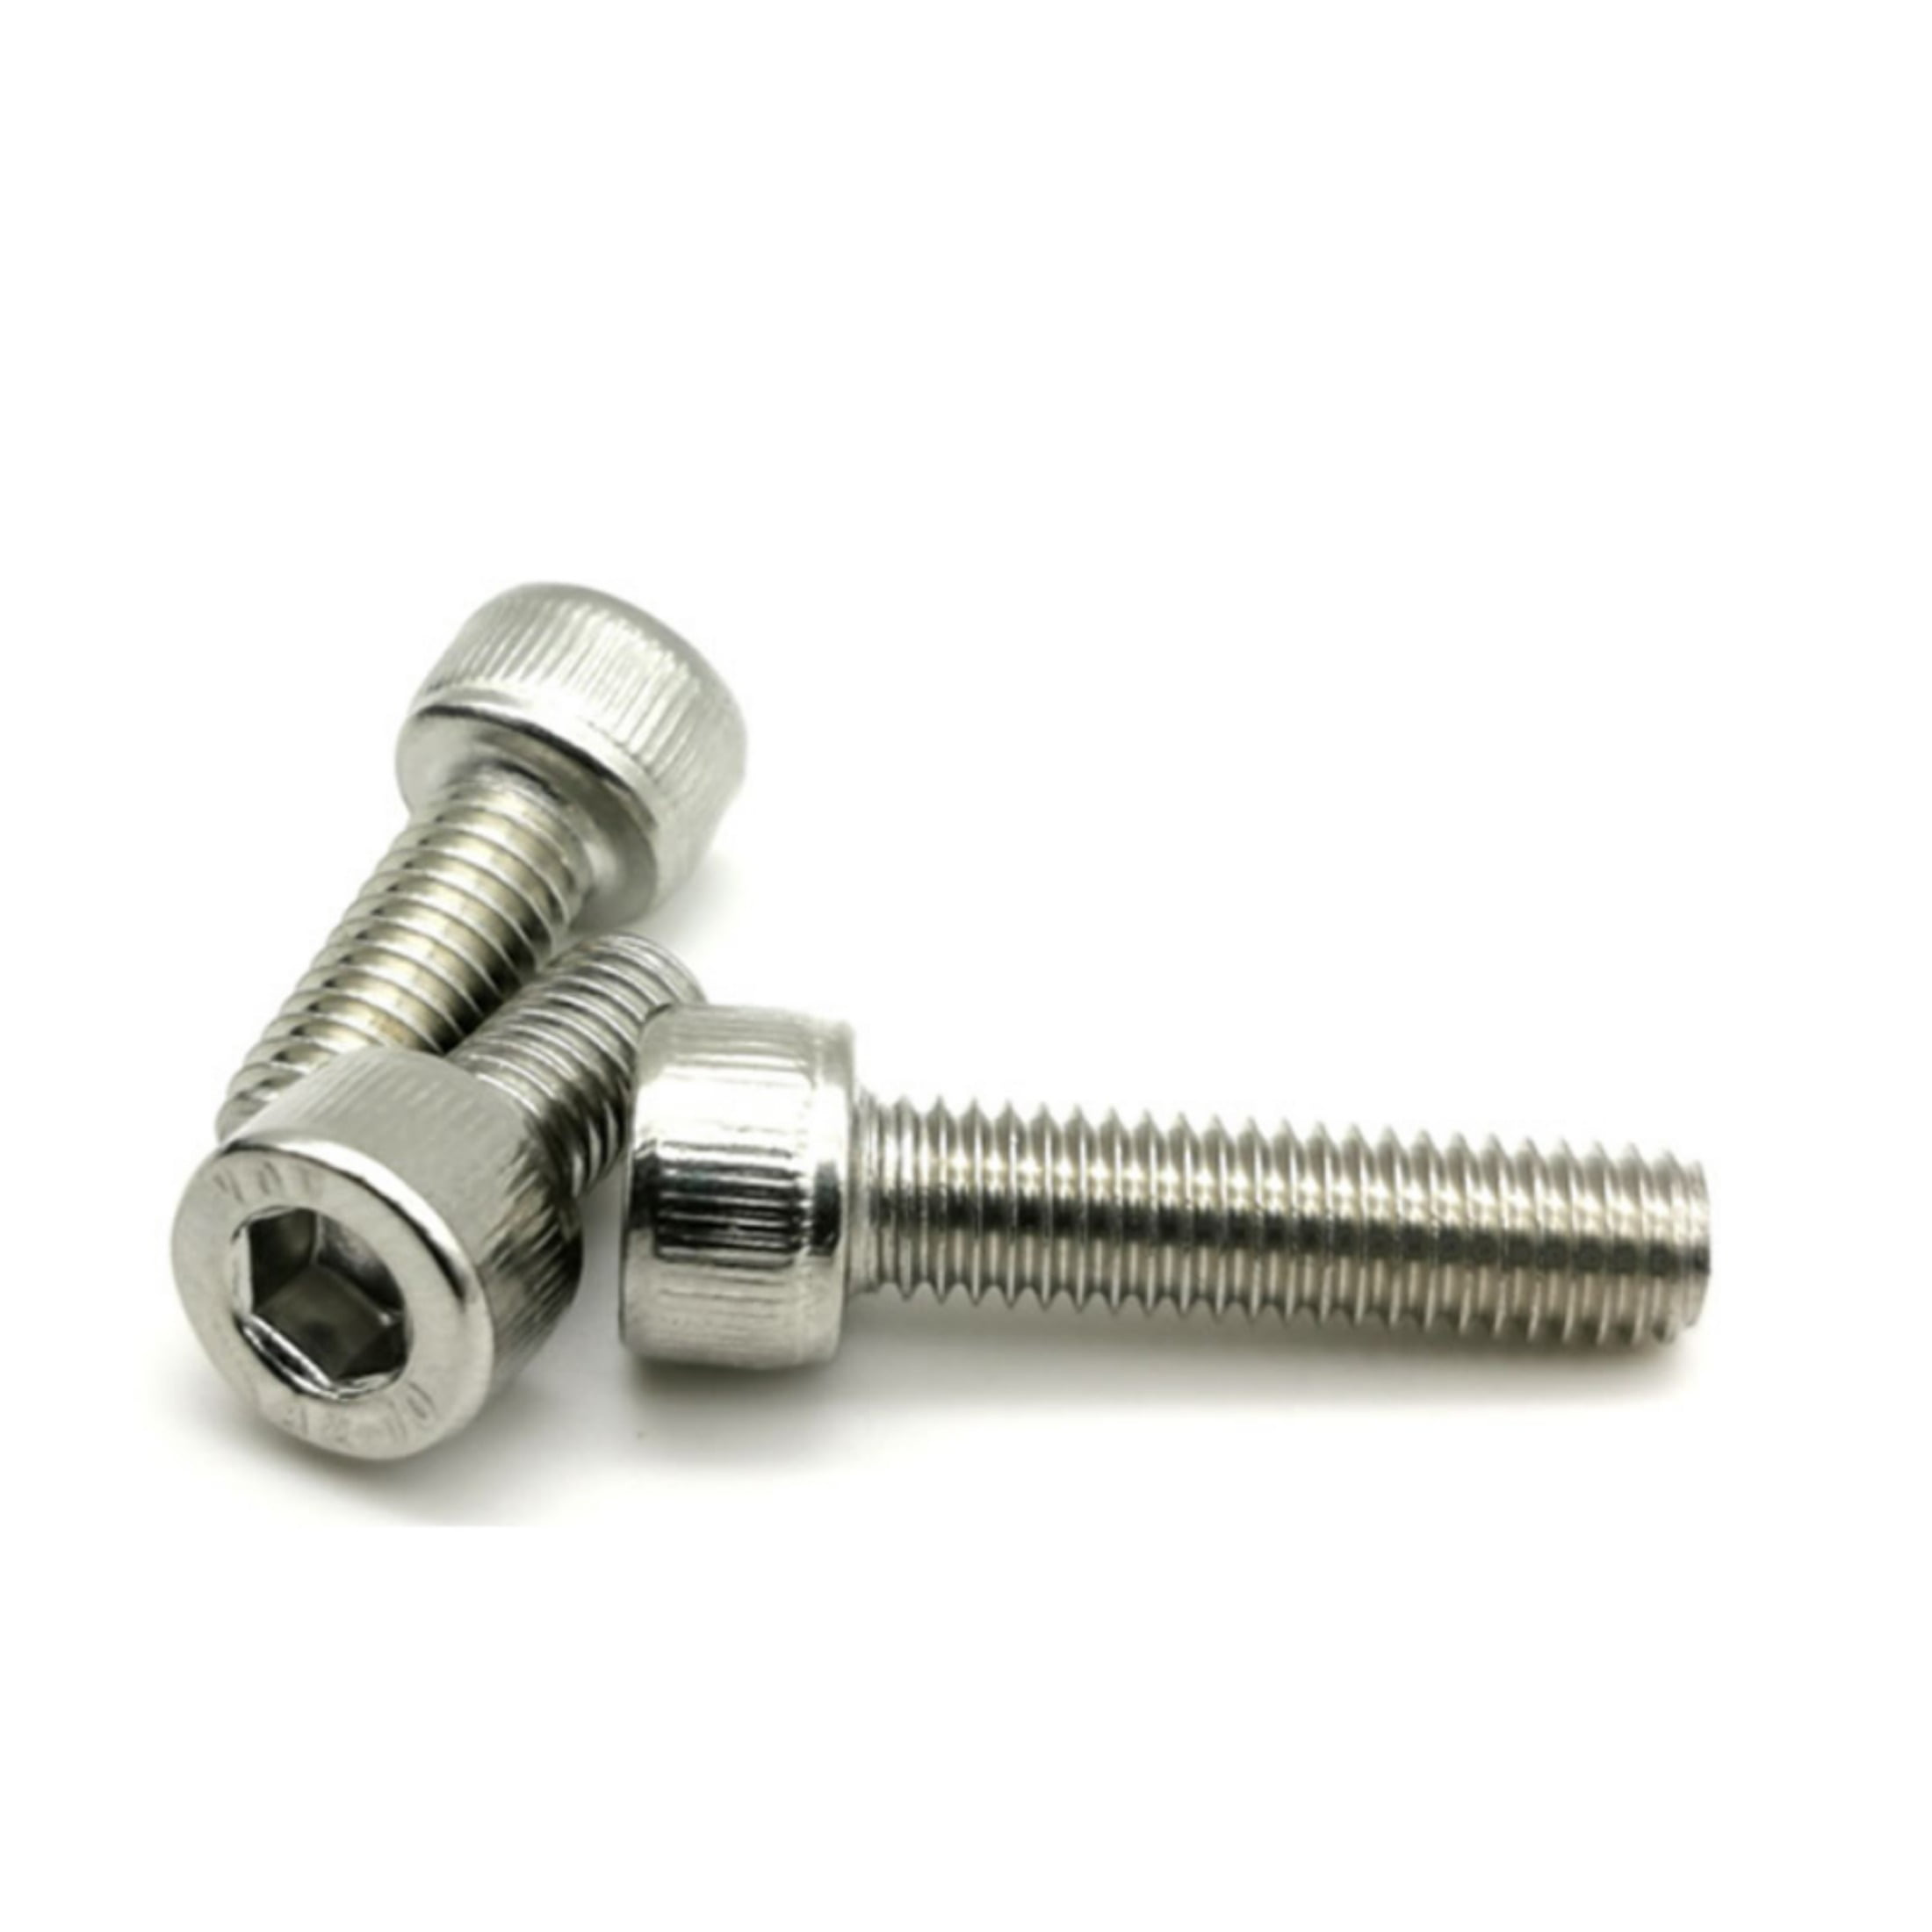 (2pcs) 316 Stainless Steel Cup Head Hexagon Screws M6x65mm (length does ...